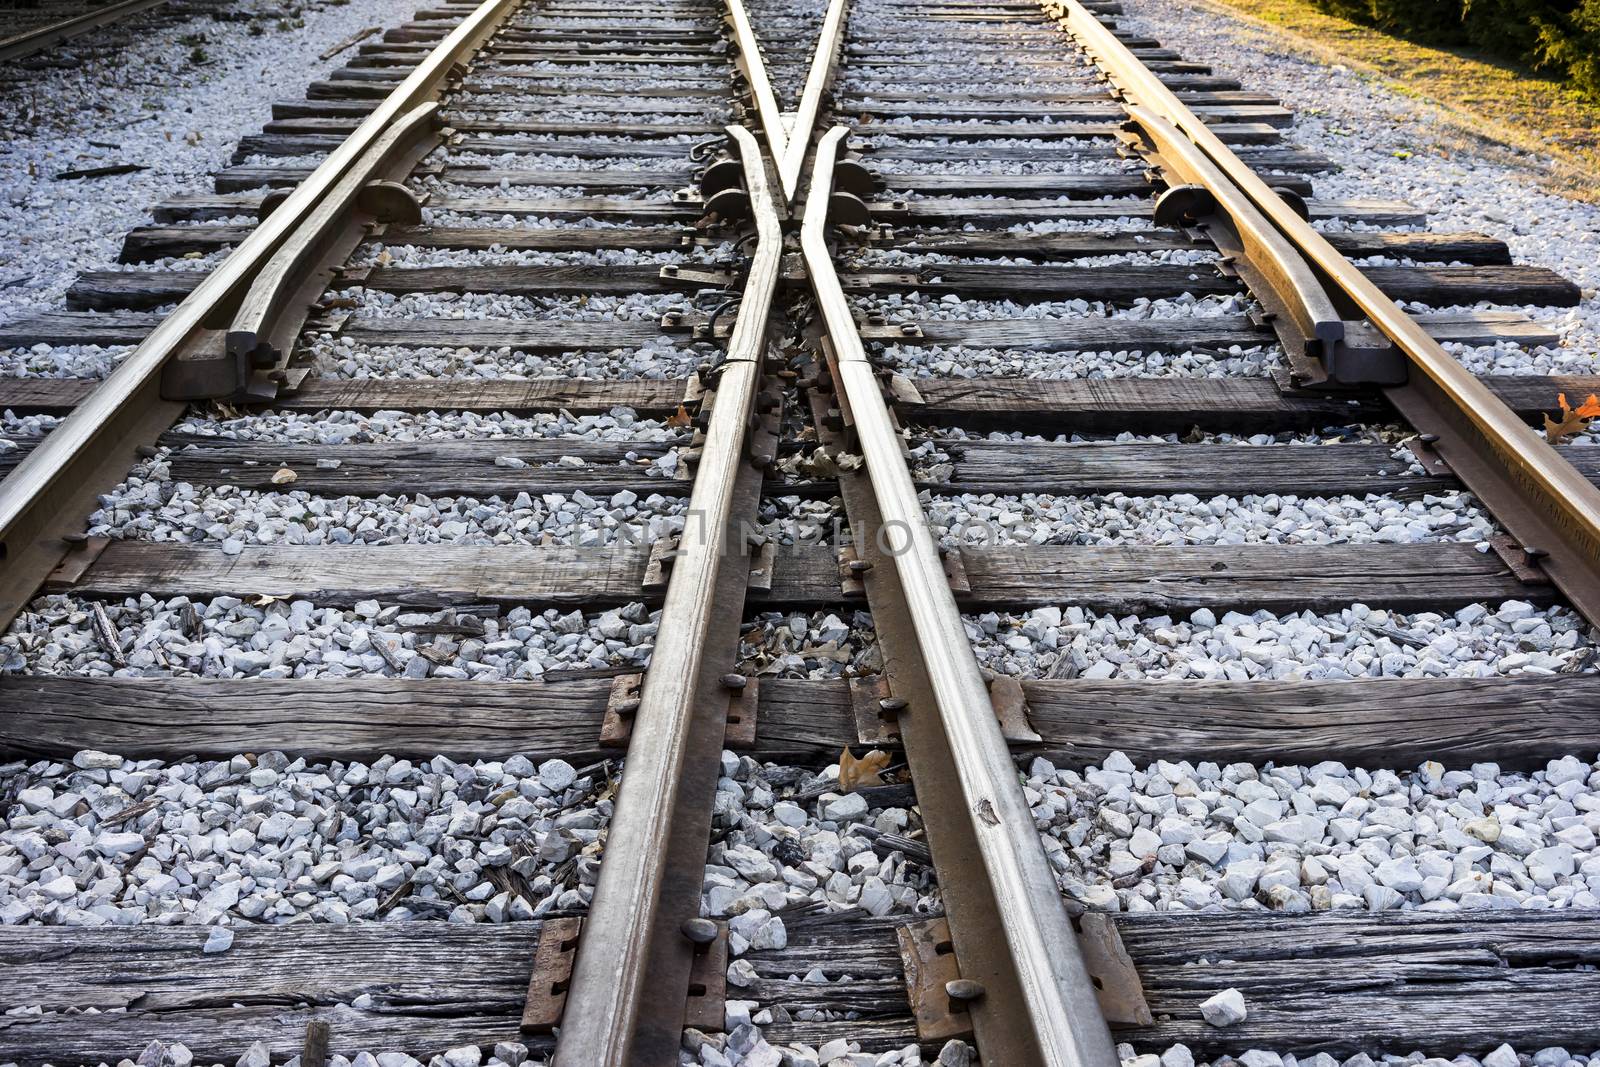 Train Tracks of Texas by leieng